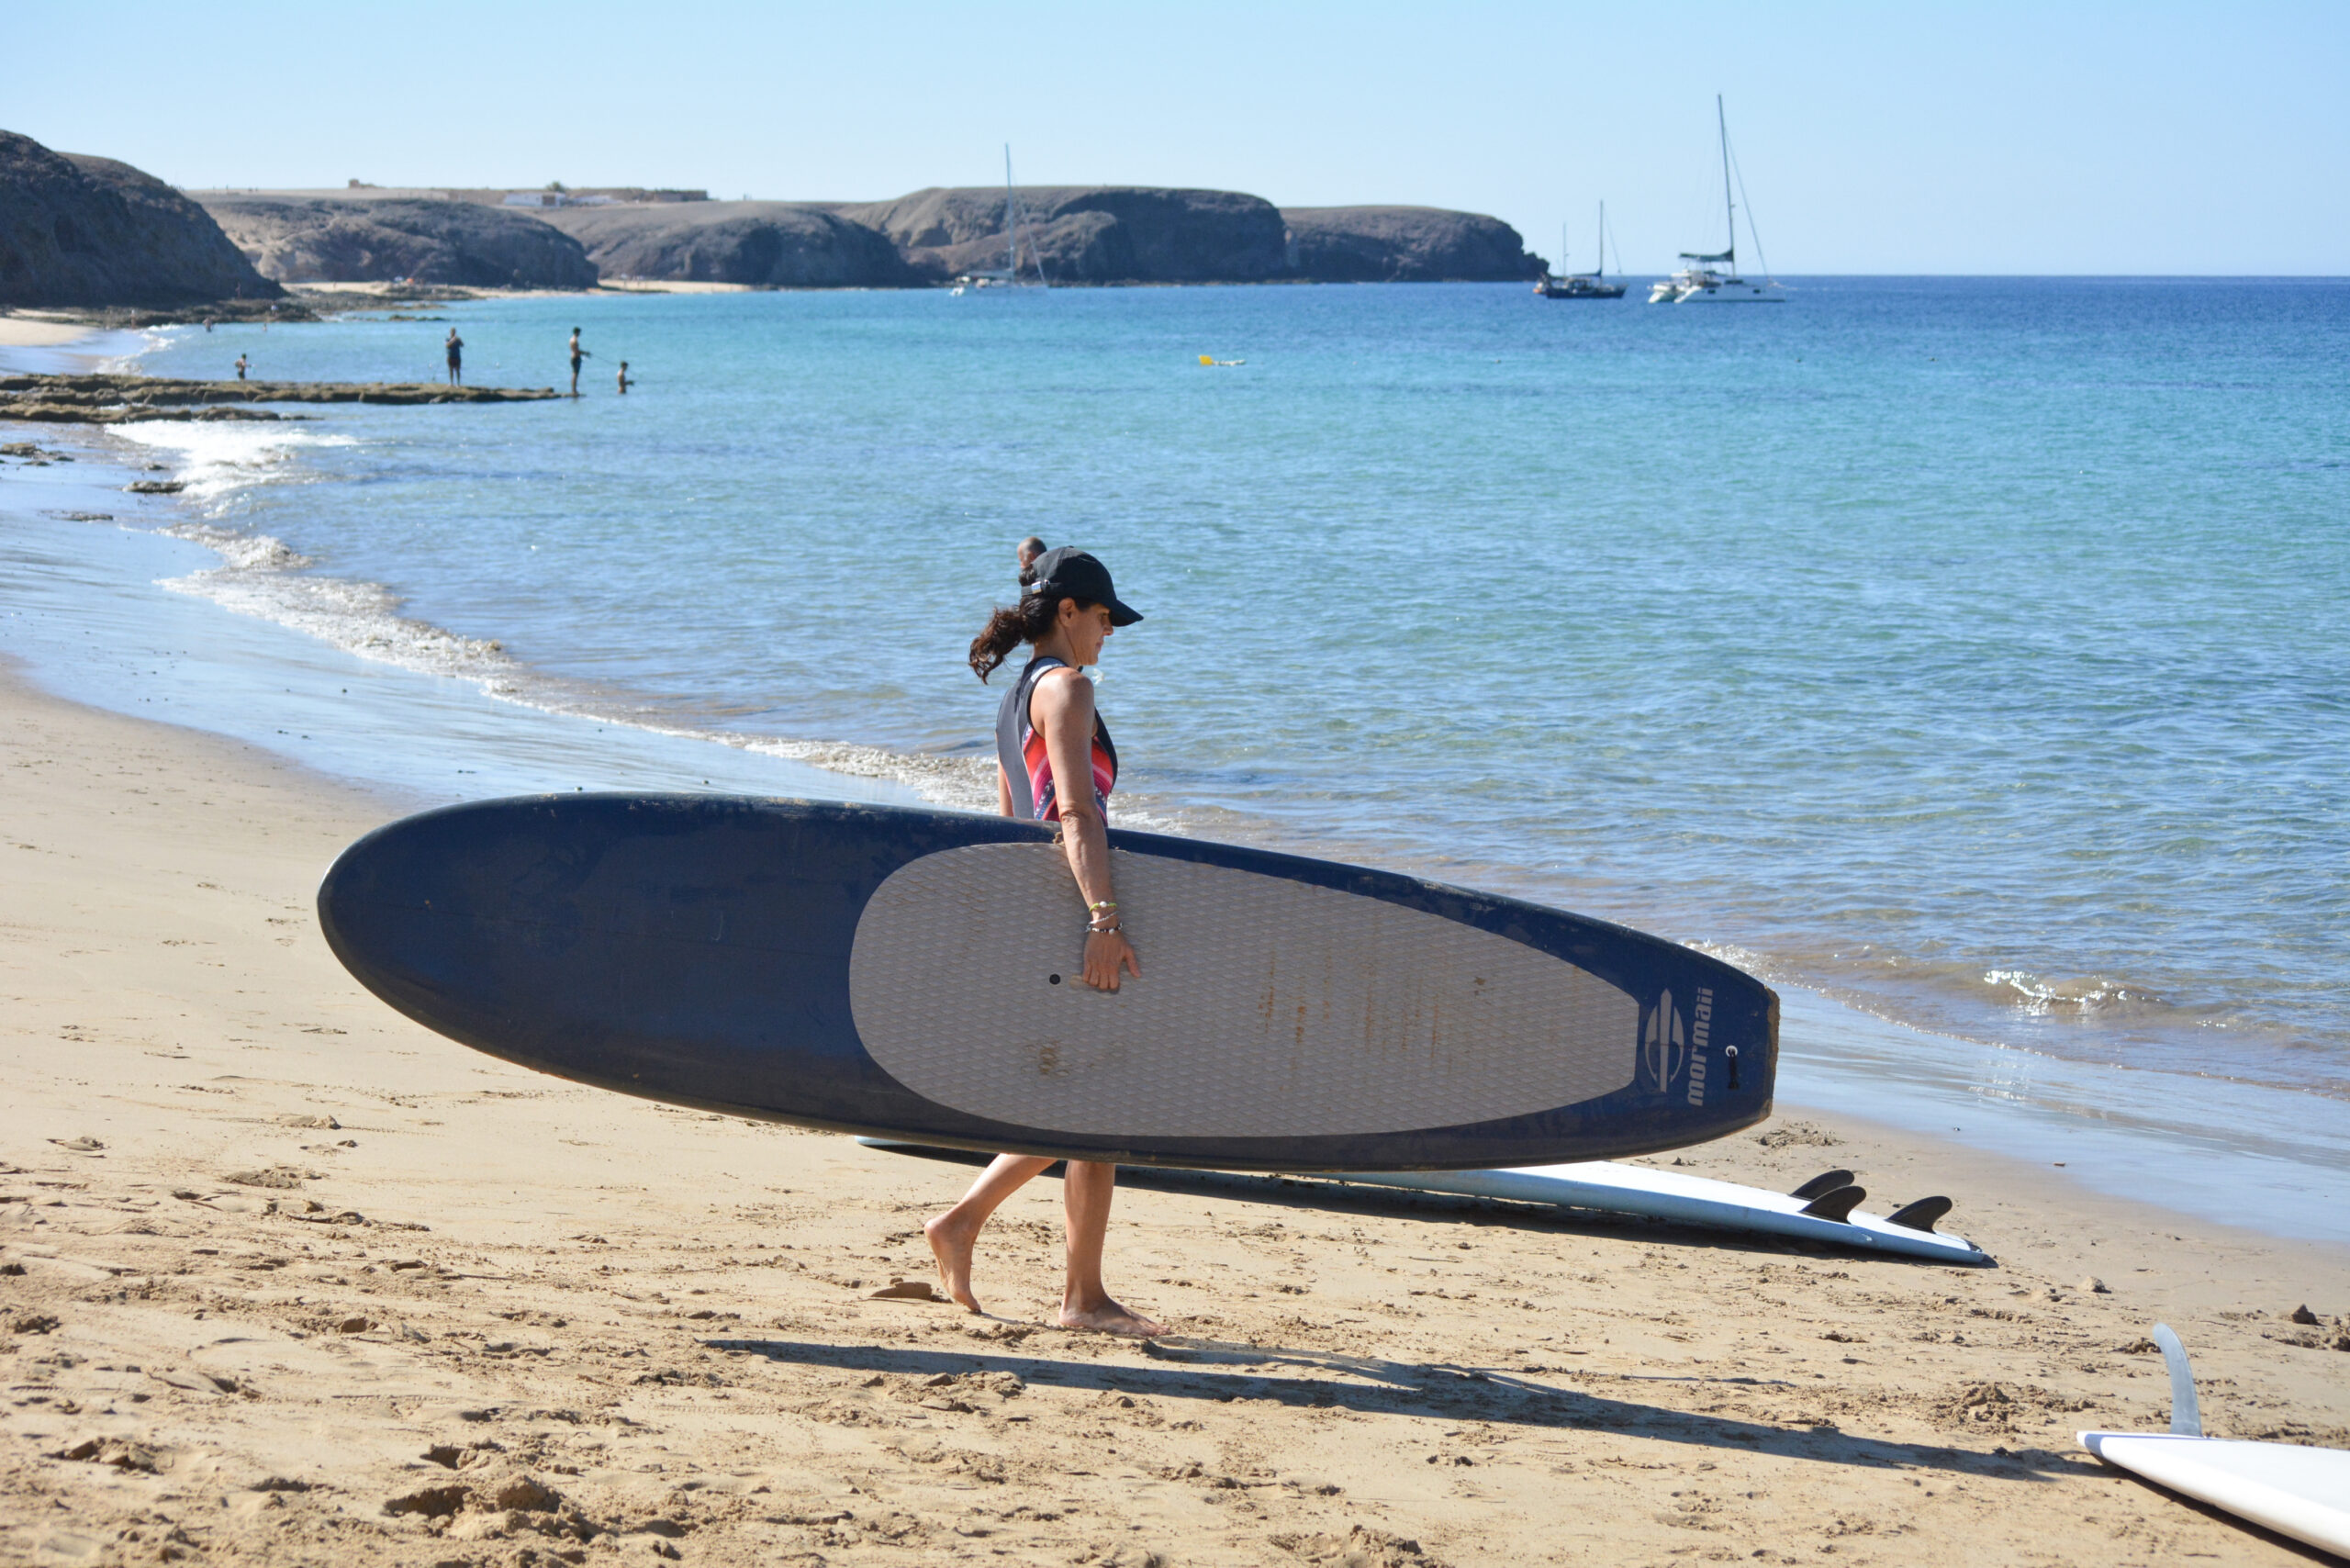 Would you like to practice Stand Up Paddle? If so, this is your post